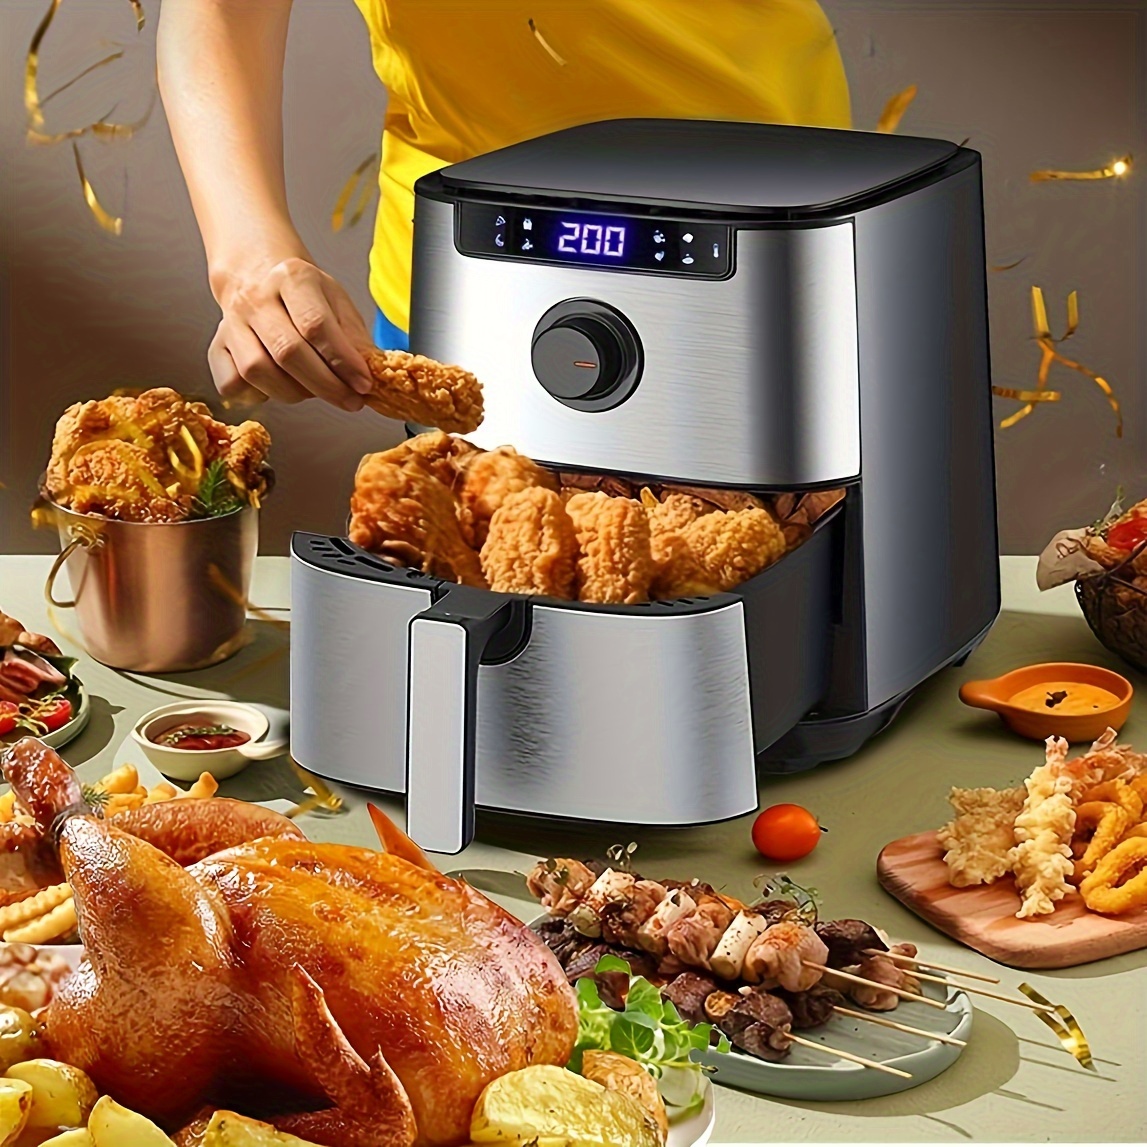 AIR FRYER (NEW IN BOX) - household items - by owner - housewares